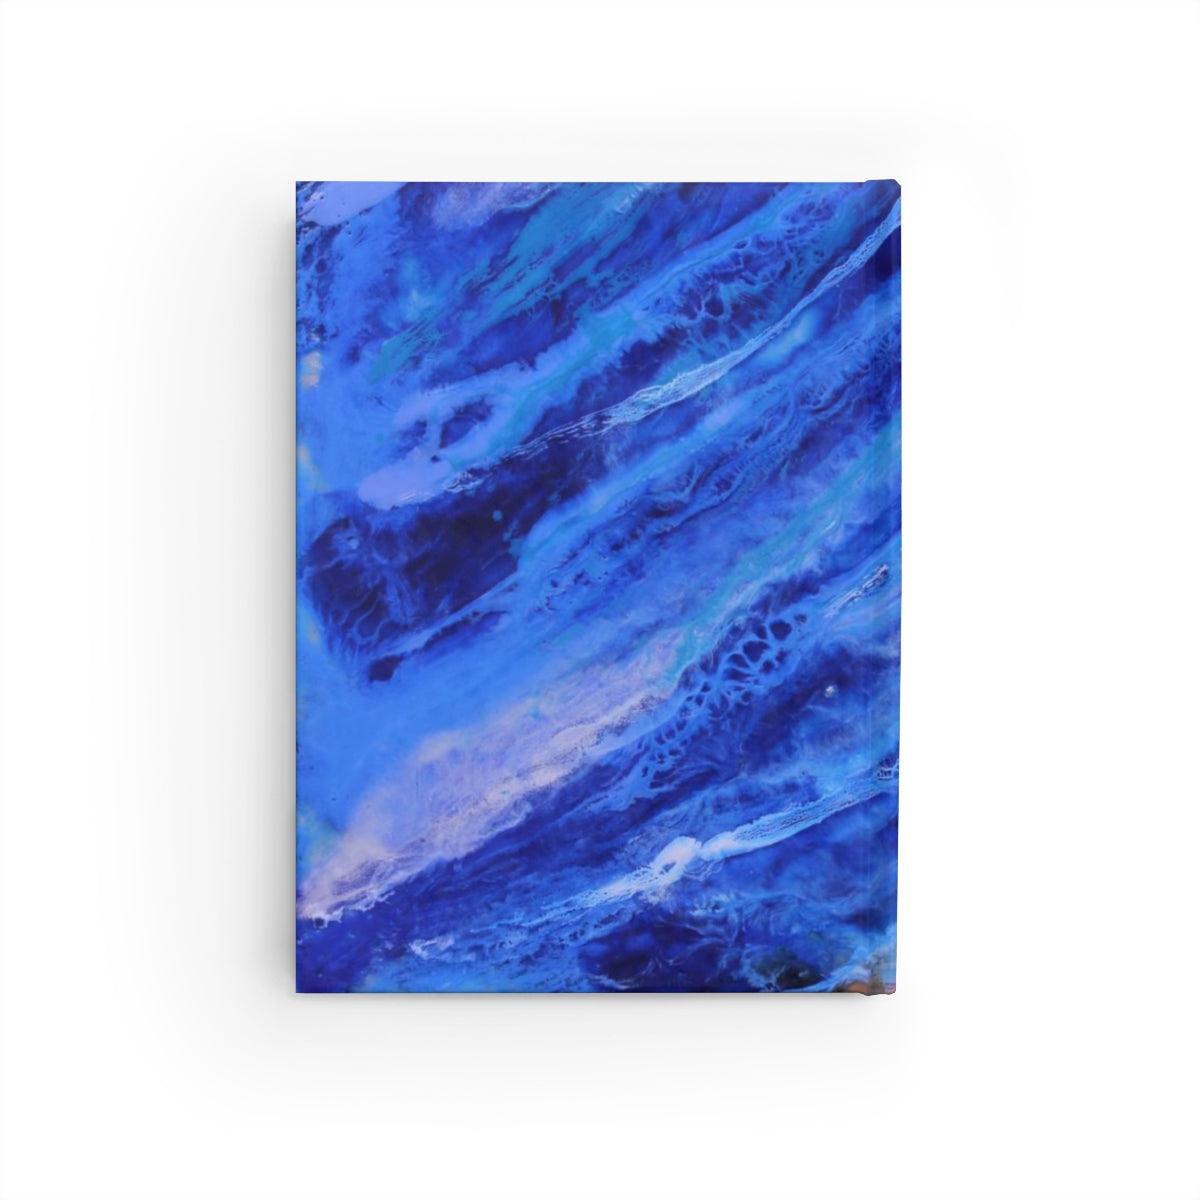 "Seascape" Journal - Ruled Line-Paper products - Mike Giannella - Encaustic Painting - Mixed Media Artist - Art Prints